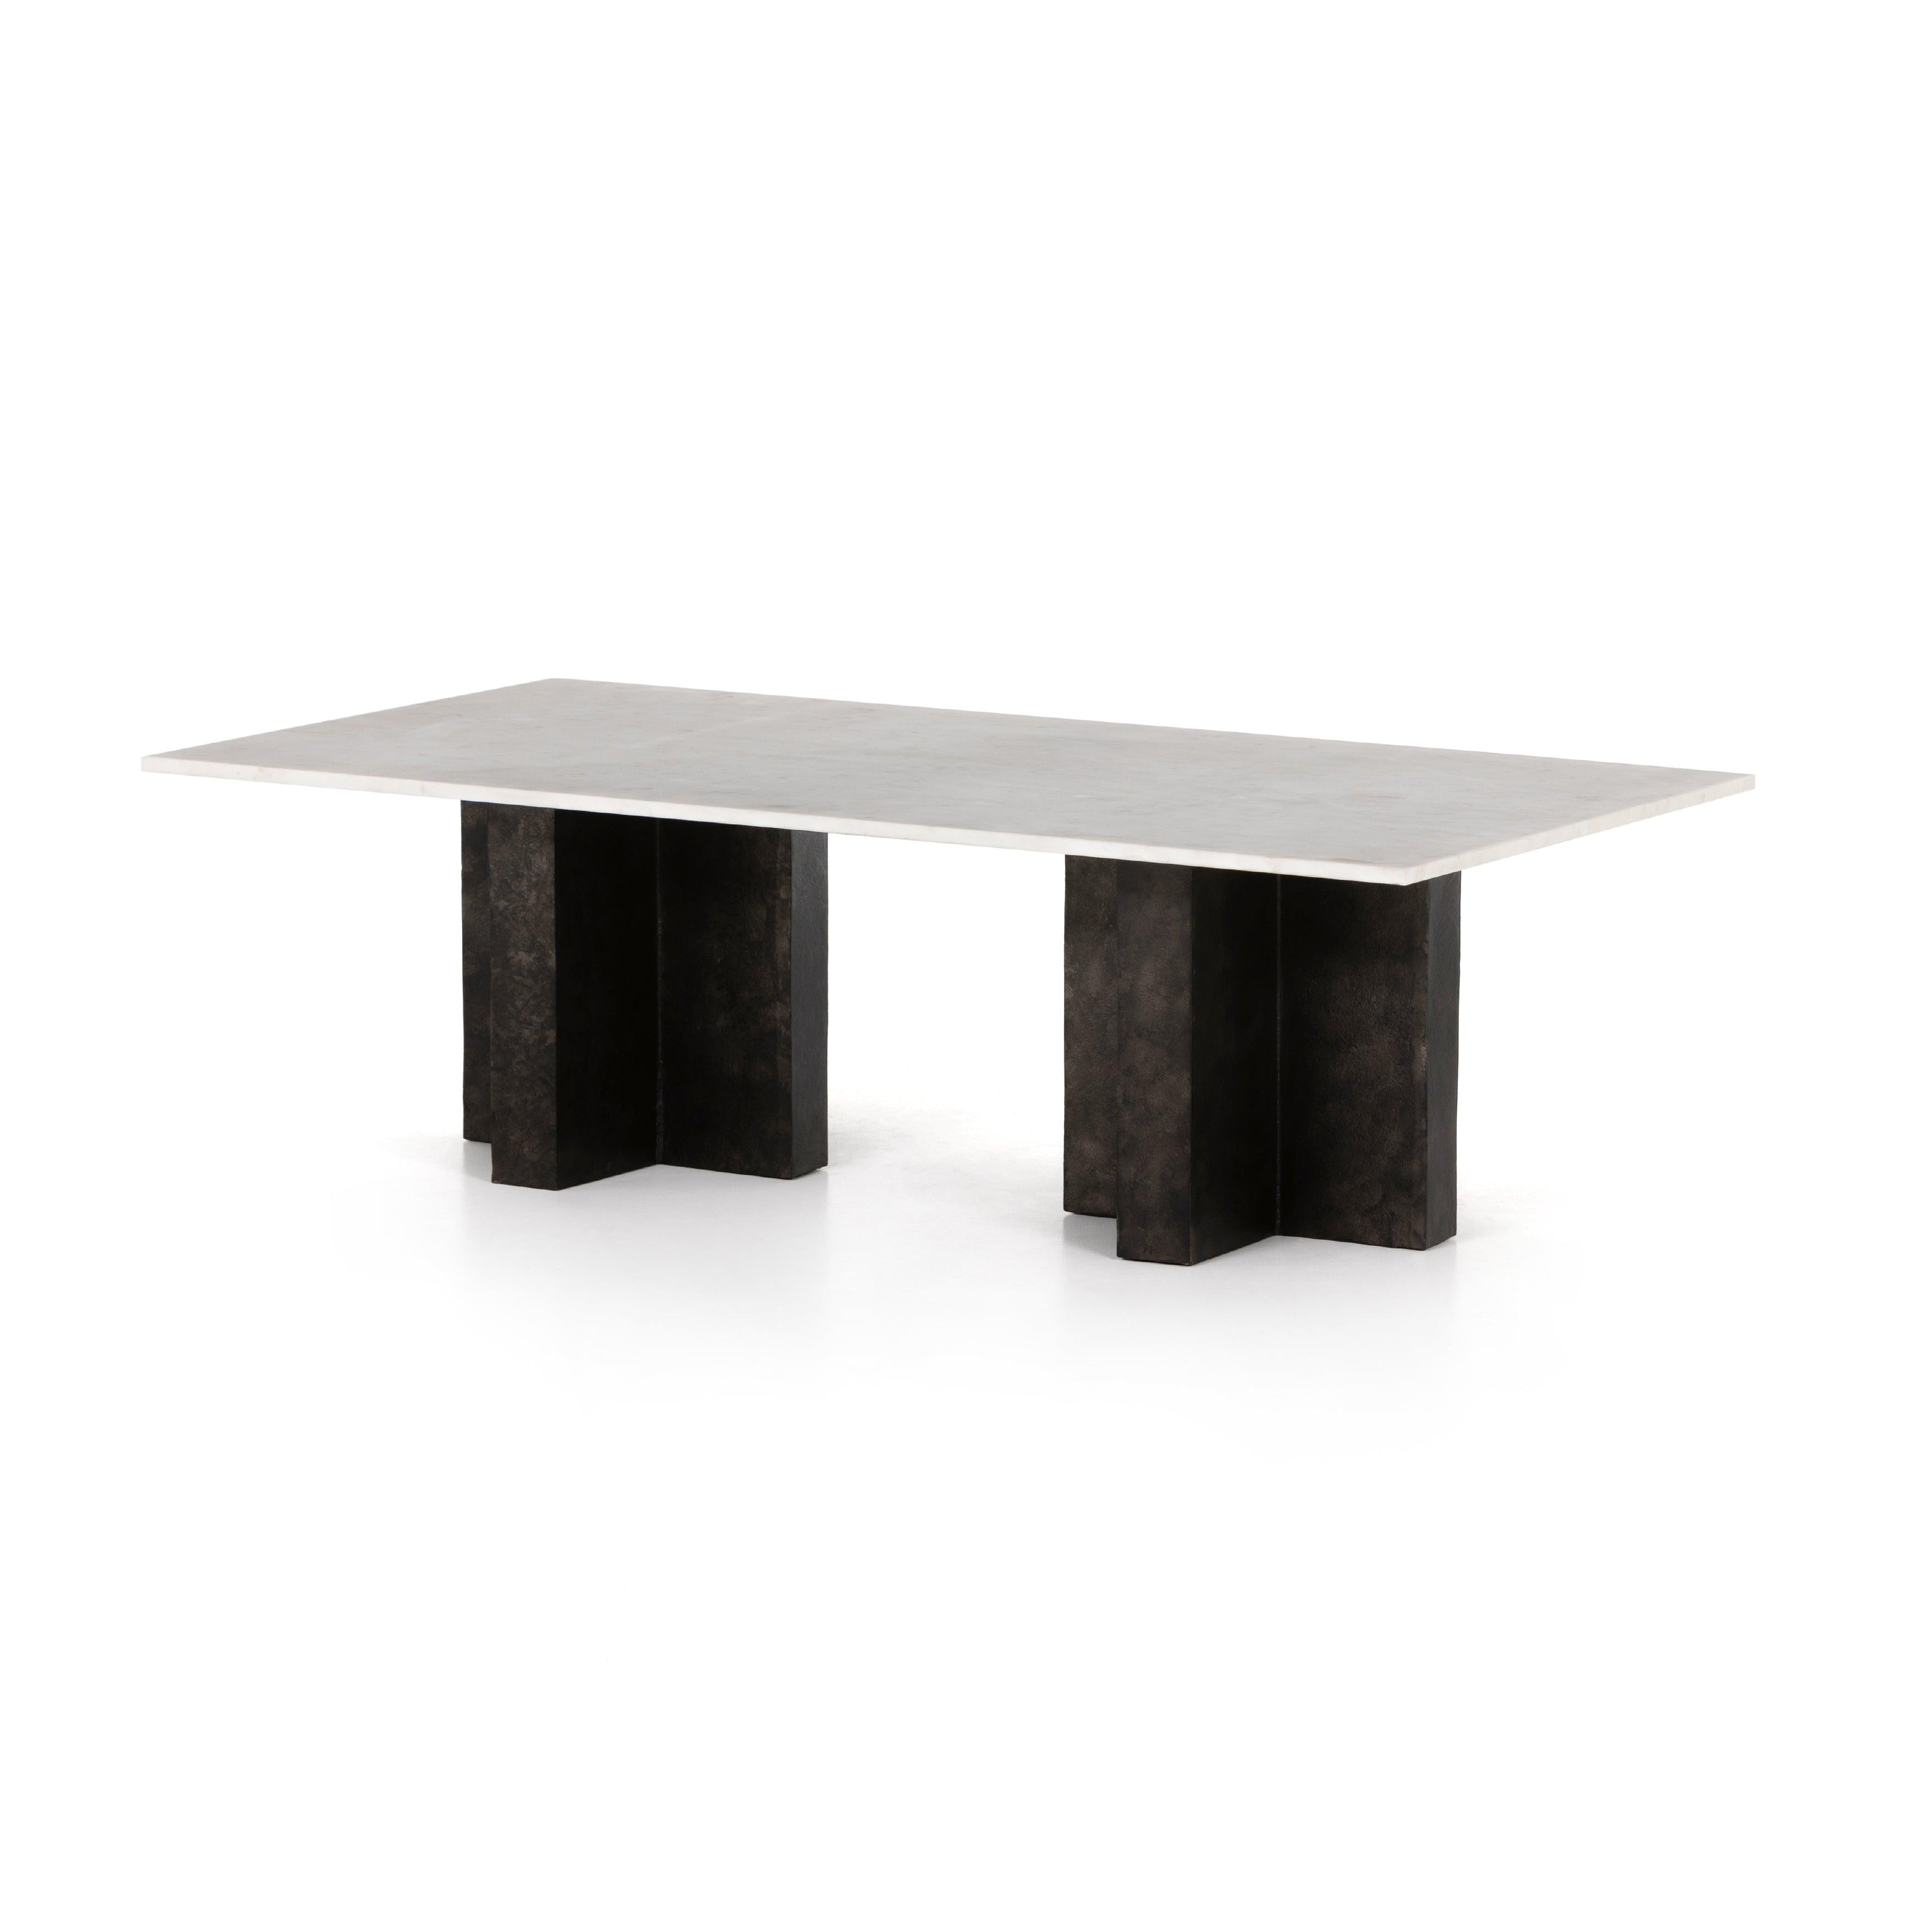 Terrell Coffee Table - Reimagine Designs - coffee table, new